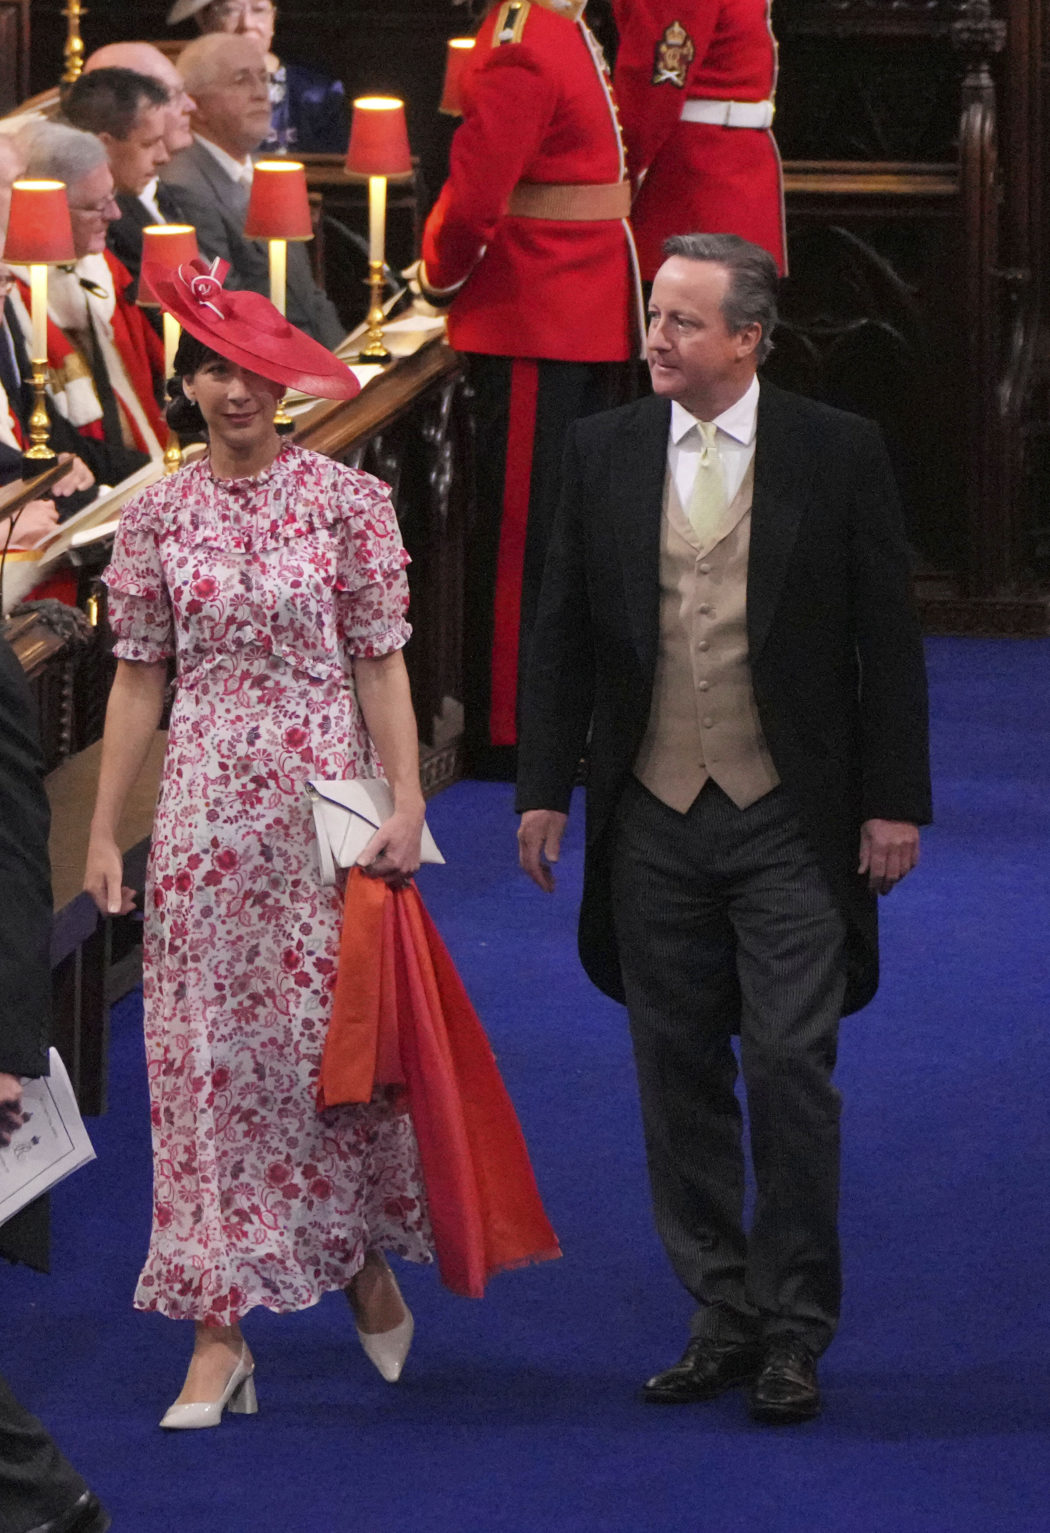 Former Prime Minister David Cameron and his wife Samantha arrive at Westminster Abbey ahead of the coronation ceremony for Britain’s King Charles III in London, Saturday, May 6, 2023. (Aaron Chown/Pool Photo via AP)